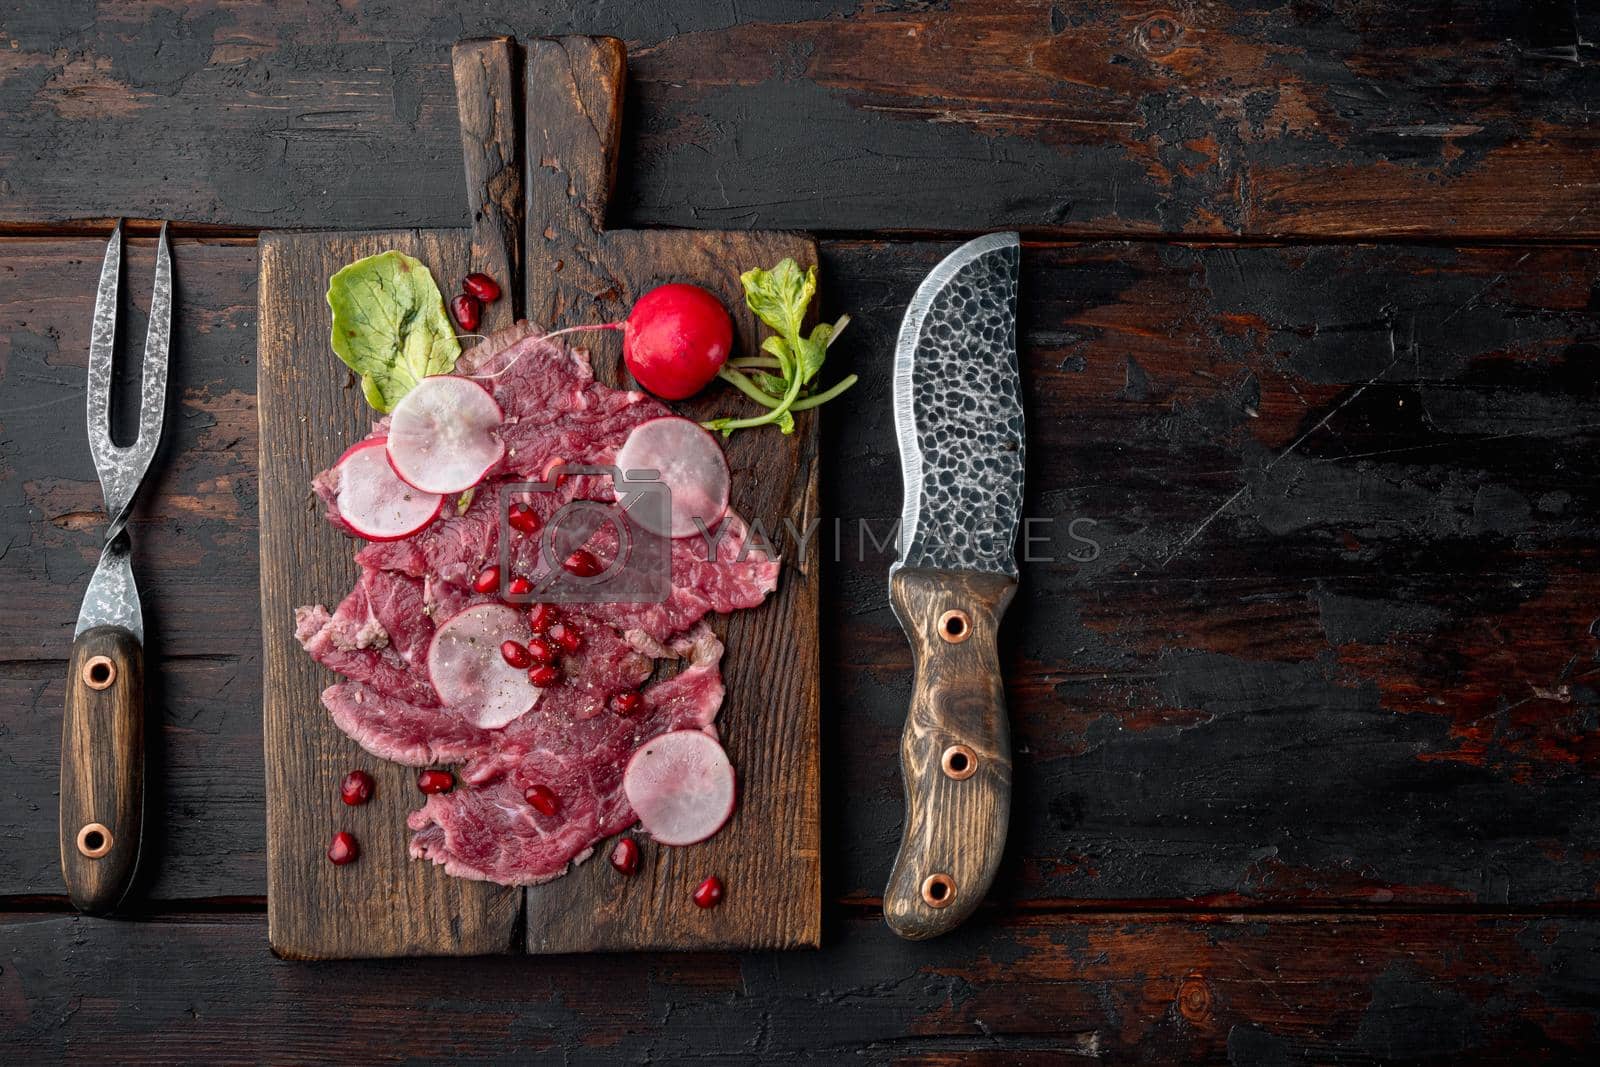 Royalty free image of Beef Carpaccio cold appetizer, with Radish and garnet, on wooden serving board, on old dark wooden table background, top view flat lay, with copy space for text by Ilianesolenyi